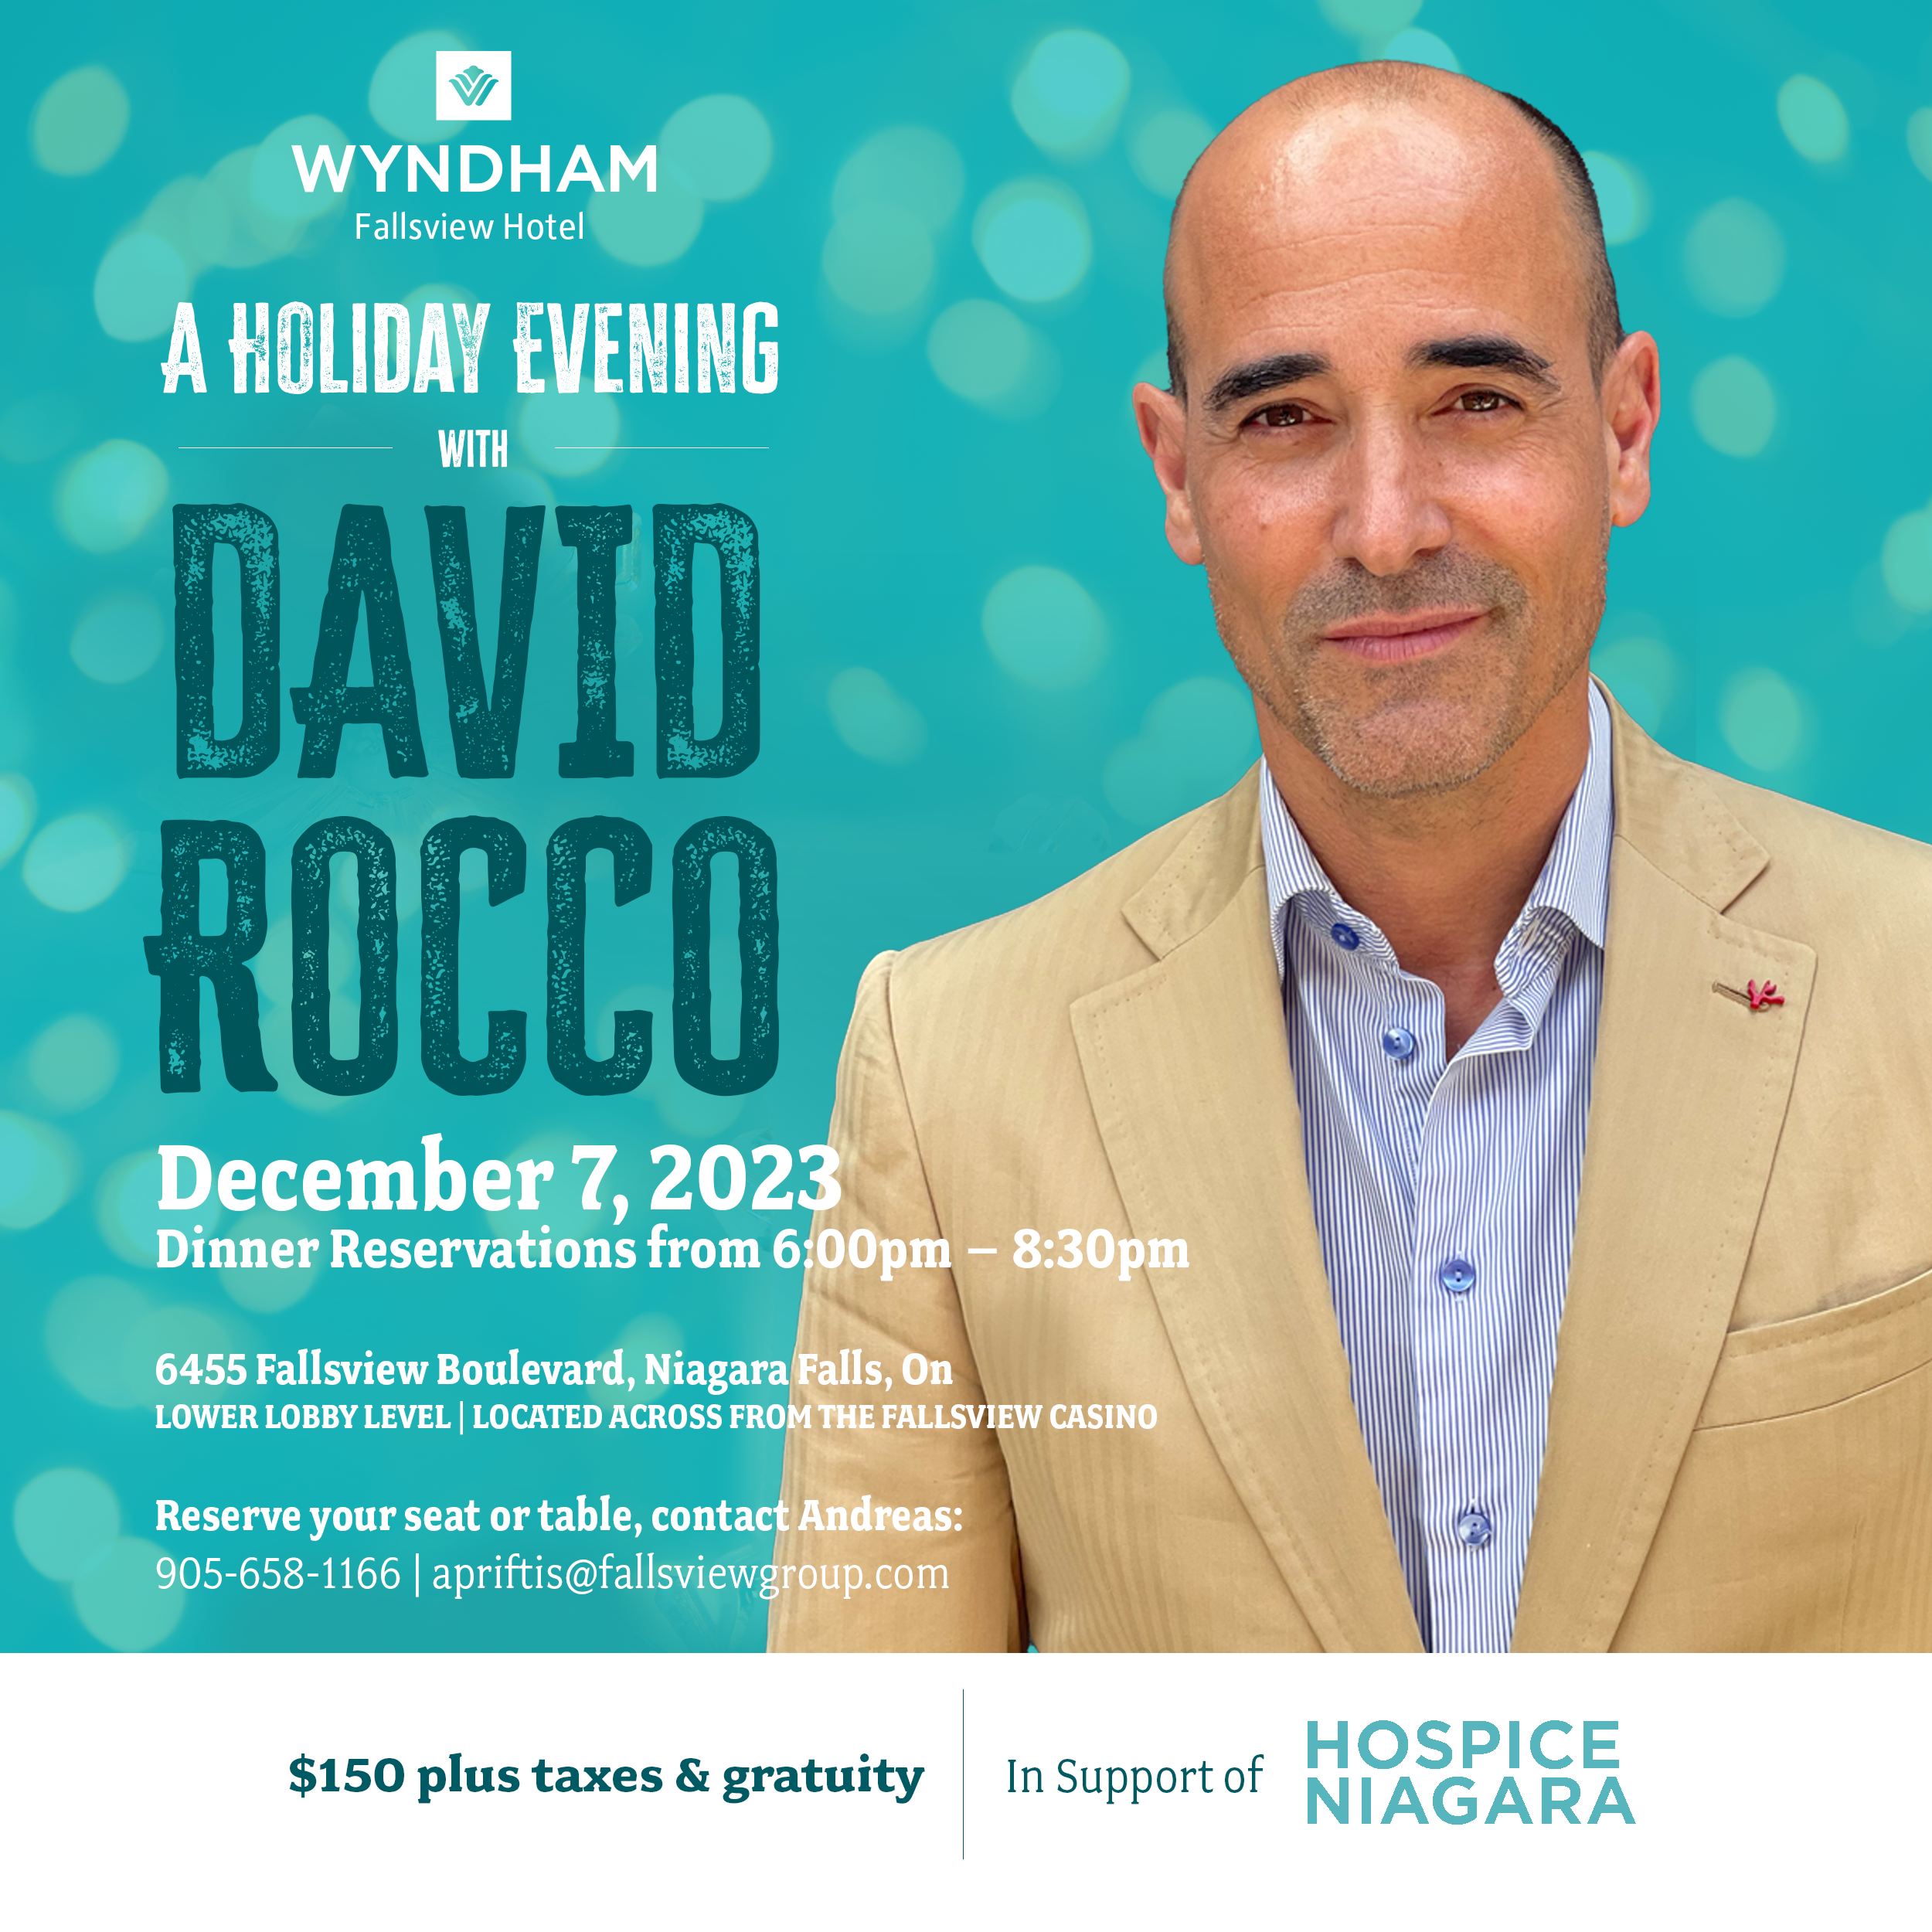 A Holiday Evening With David Rocco - December 7th, 2023